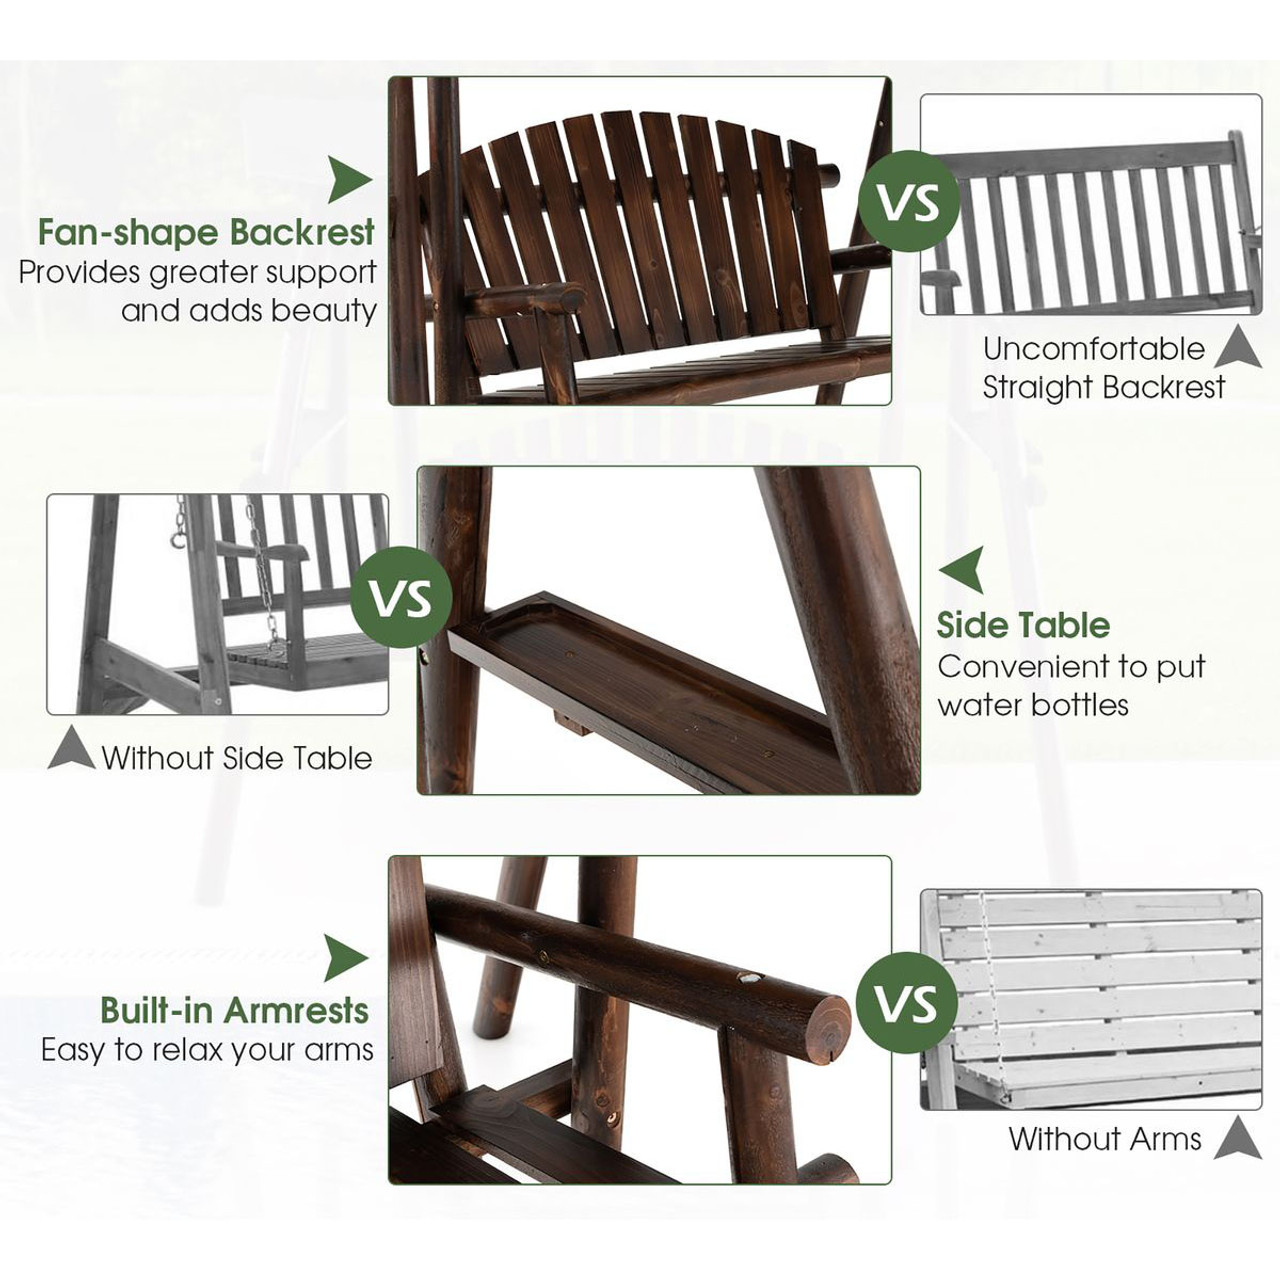 2-Person Outdoor Wooden Porch Swing with Adjustable Canopy product image